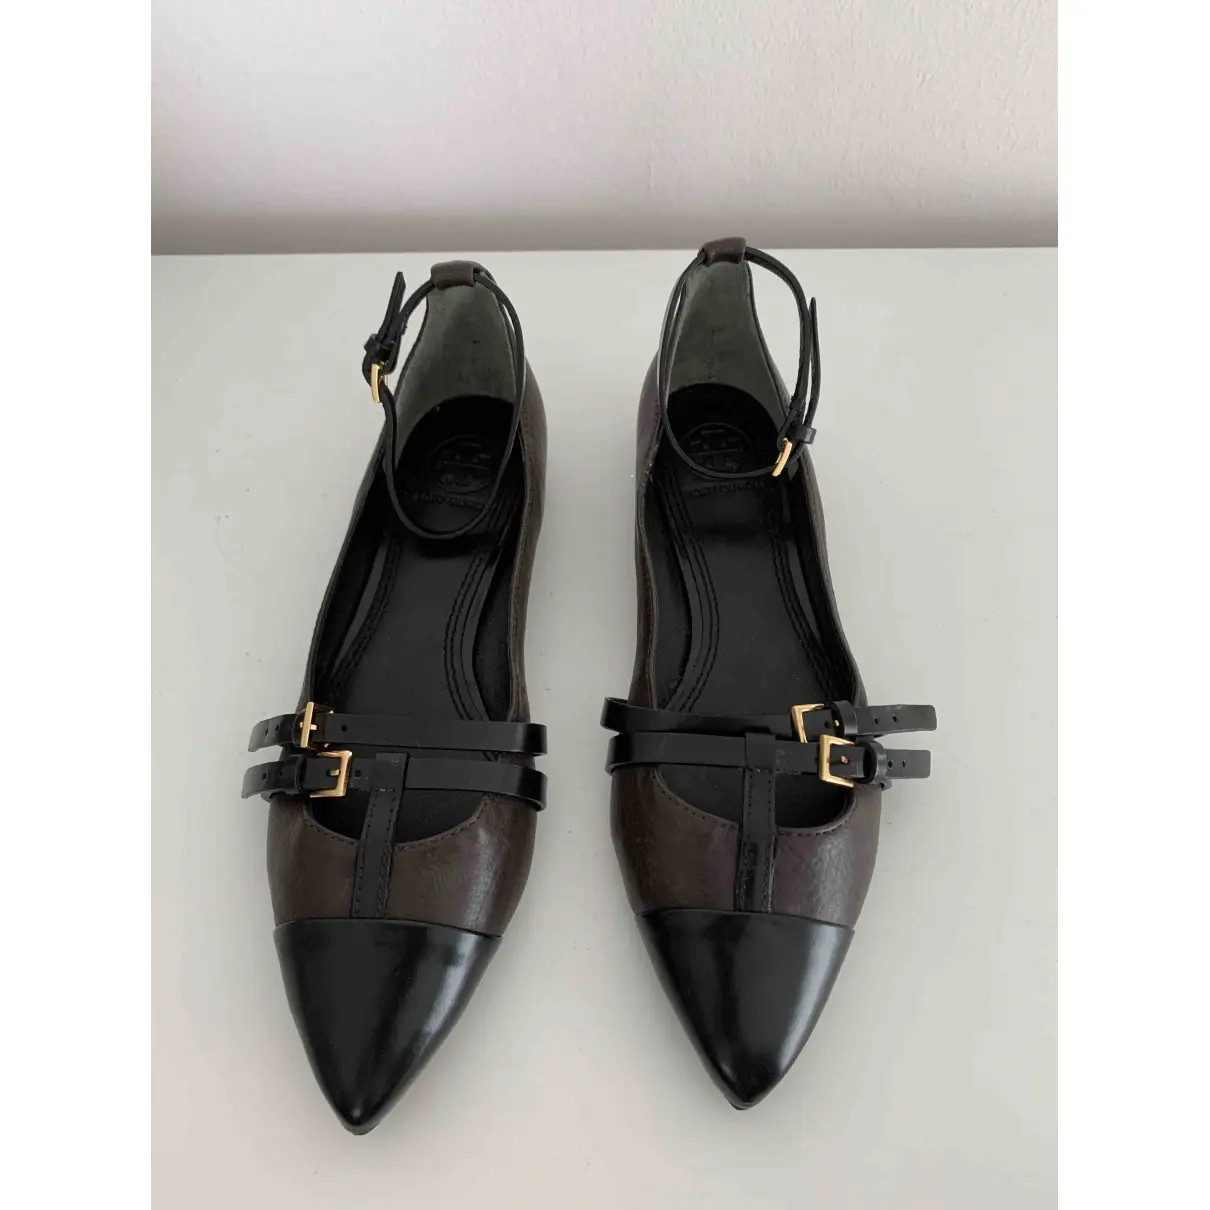 Tory Burch Leather flats for sale